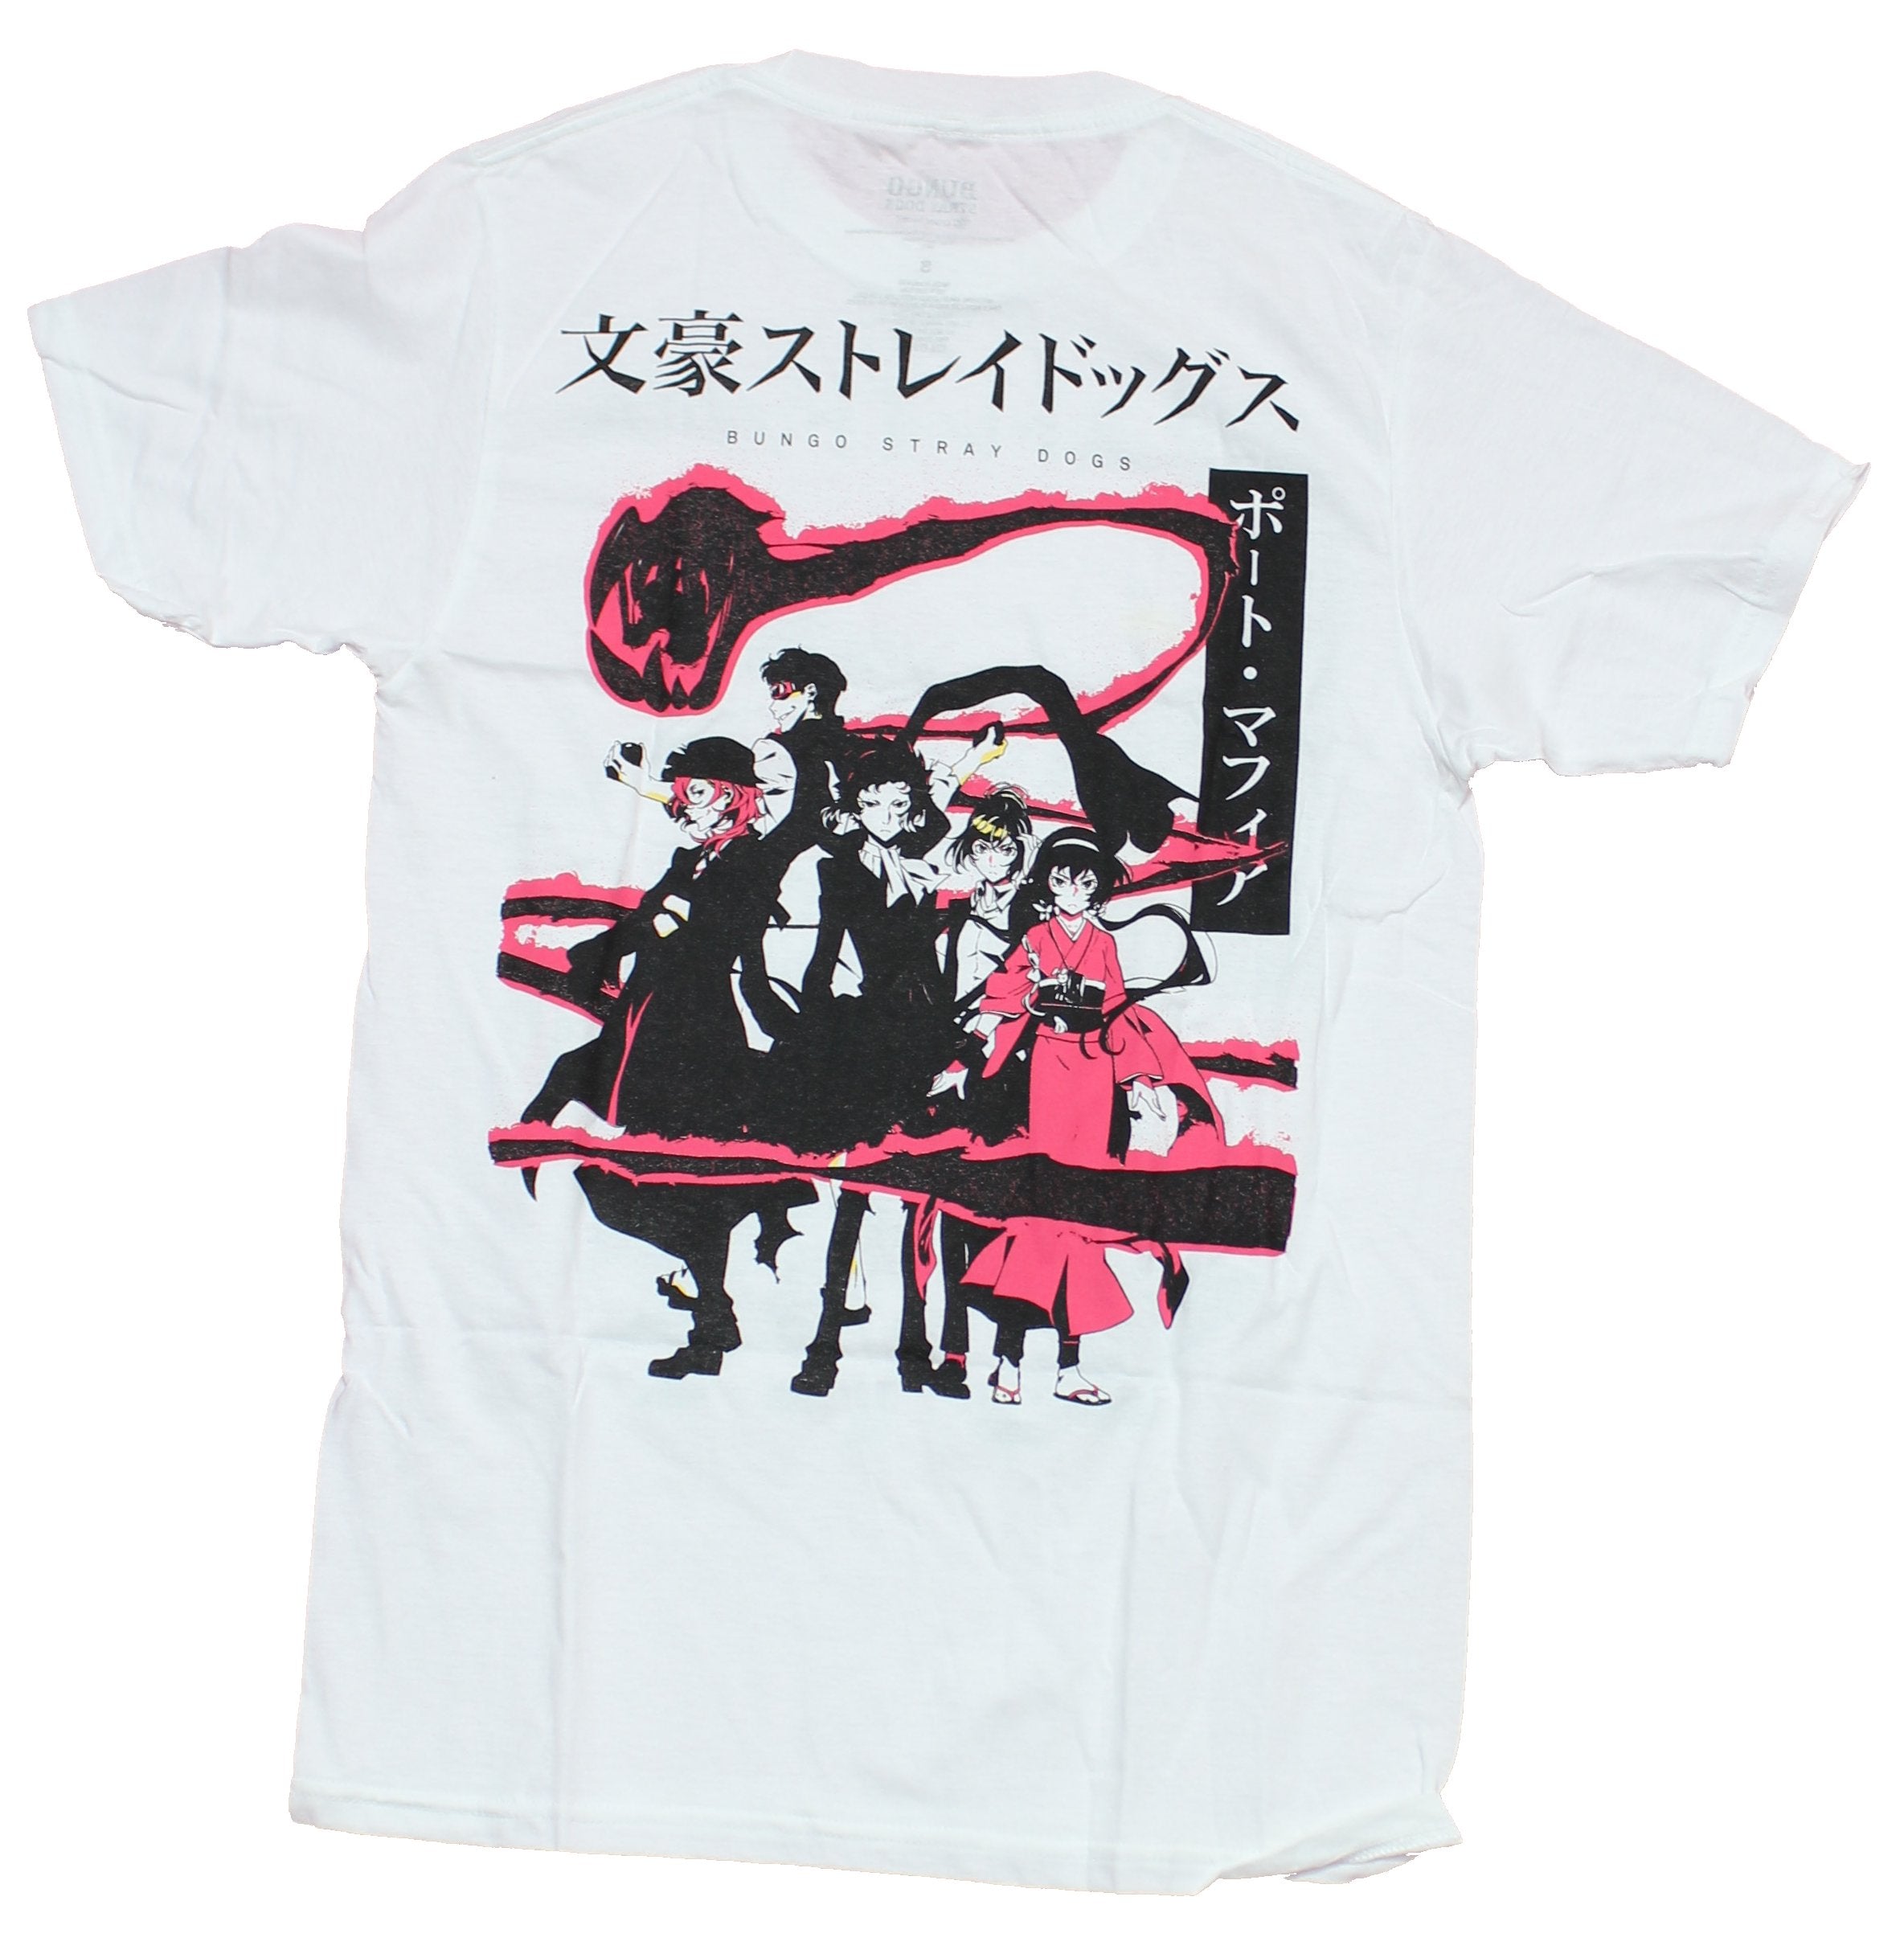 Bungo Stray Dogs Mens T-Shirt -Group Front & Back Under Kanji